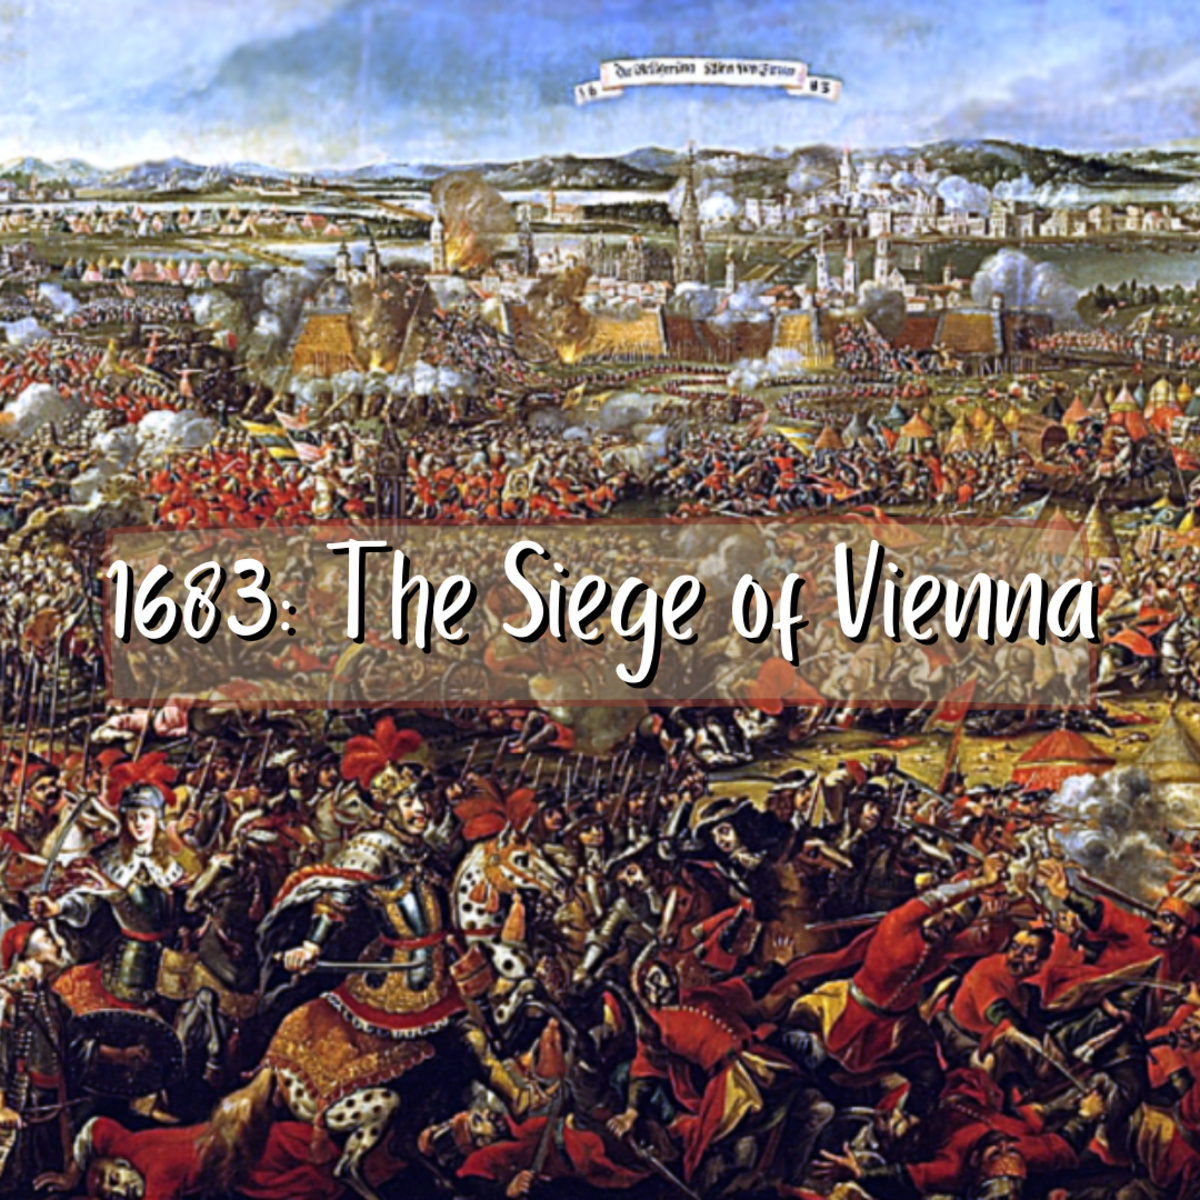 Read on to learn about the Siege of Vienna by the Ottomans in 1683.